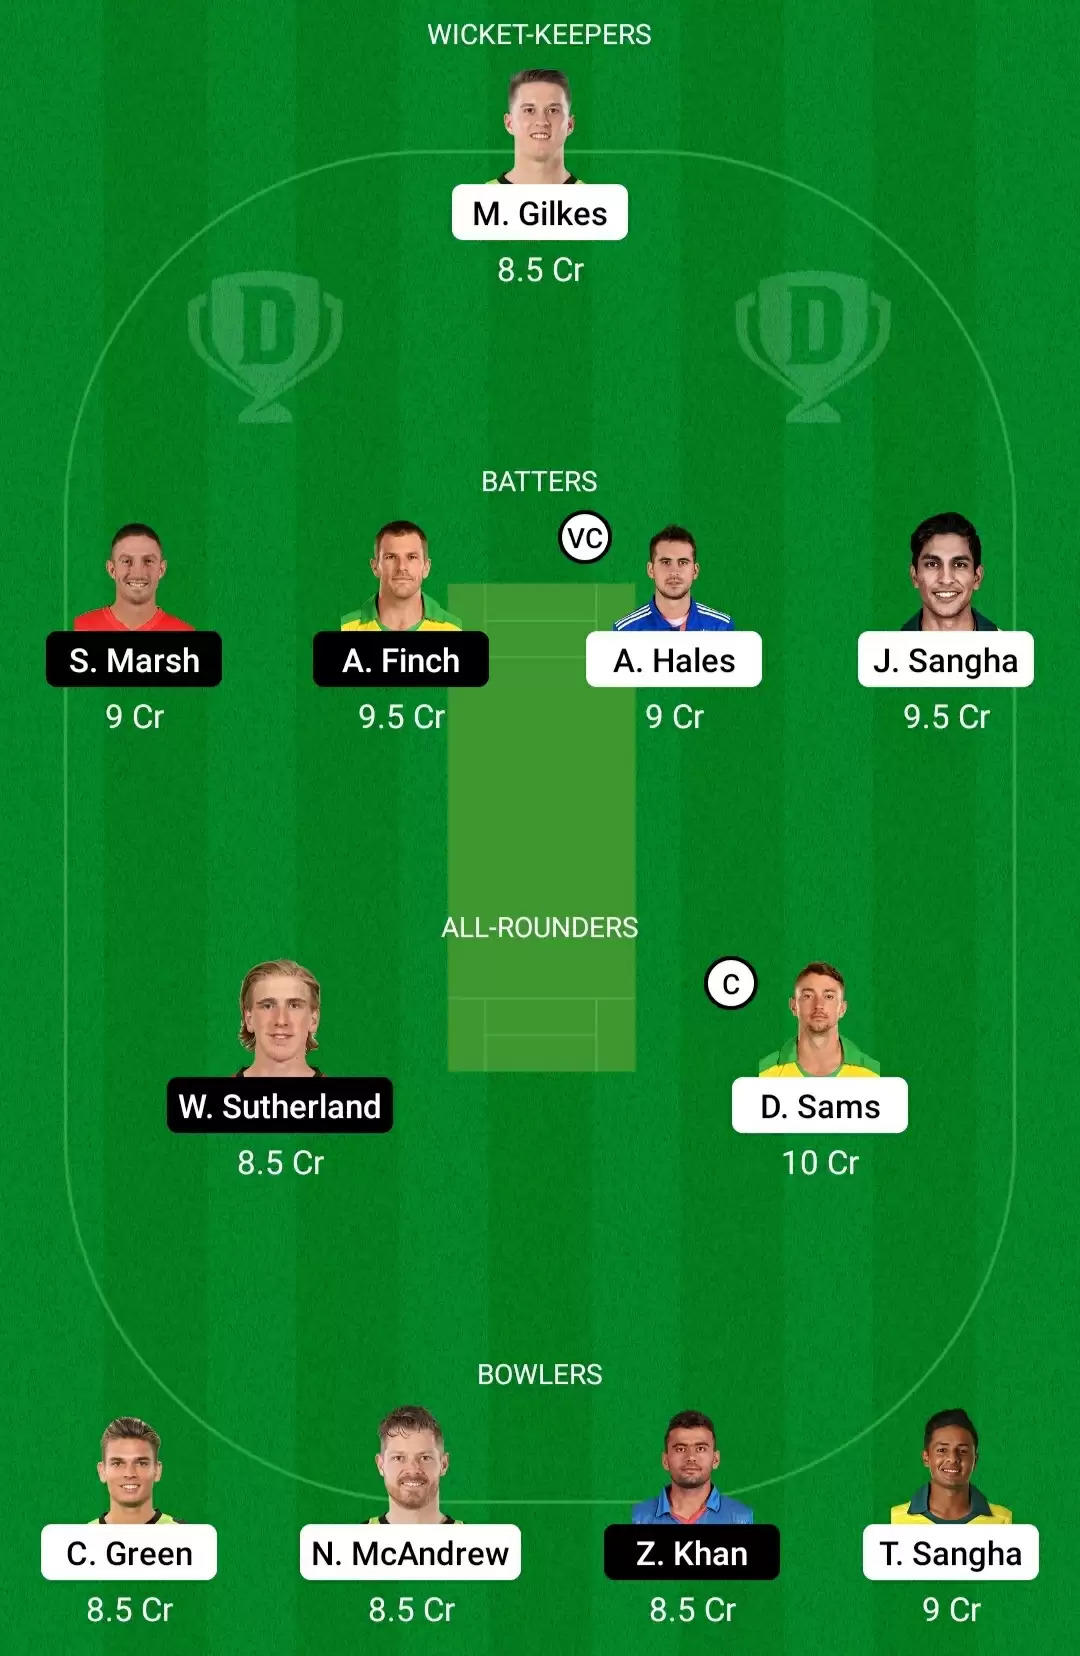 THU vs REN Dream11 Prediction for BBL 2021-22: Playing XI, Fantasy Cricket Tips, Team, Weather Updates and Pitch Report